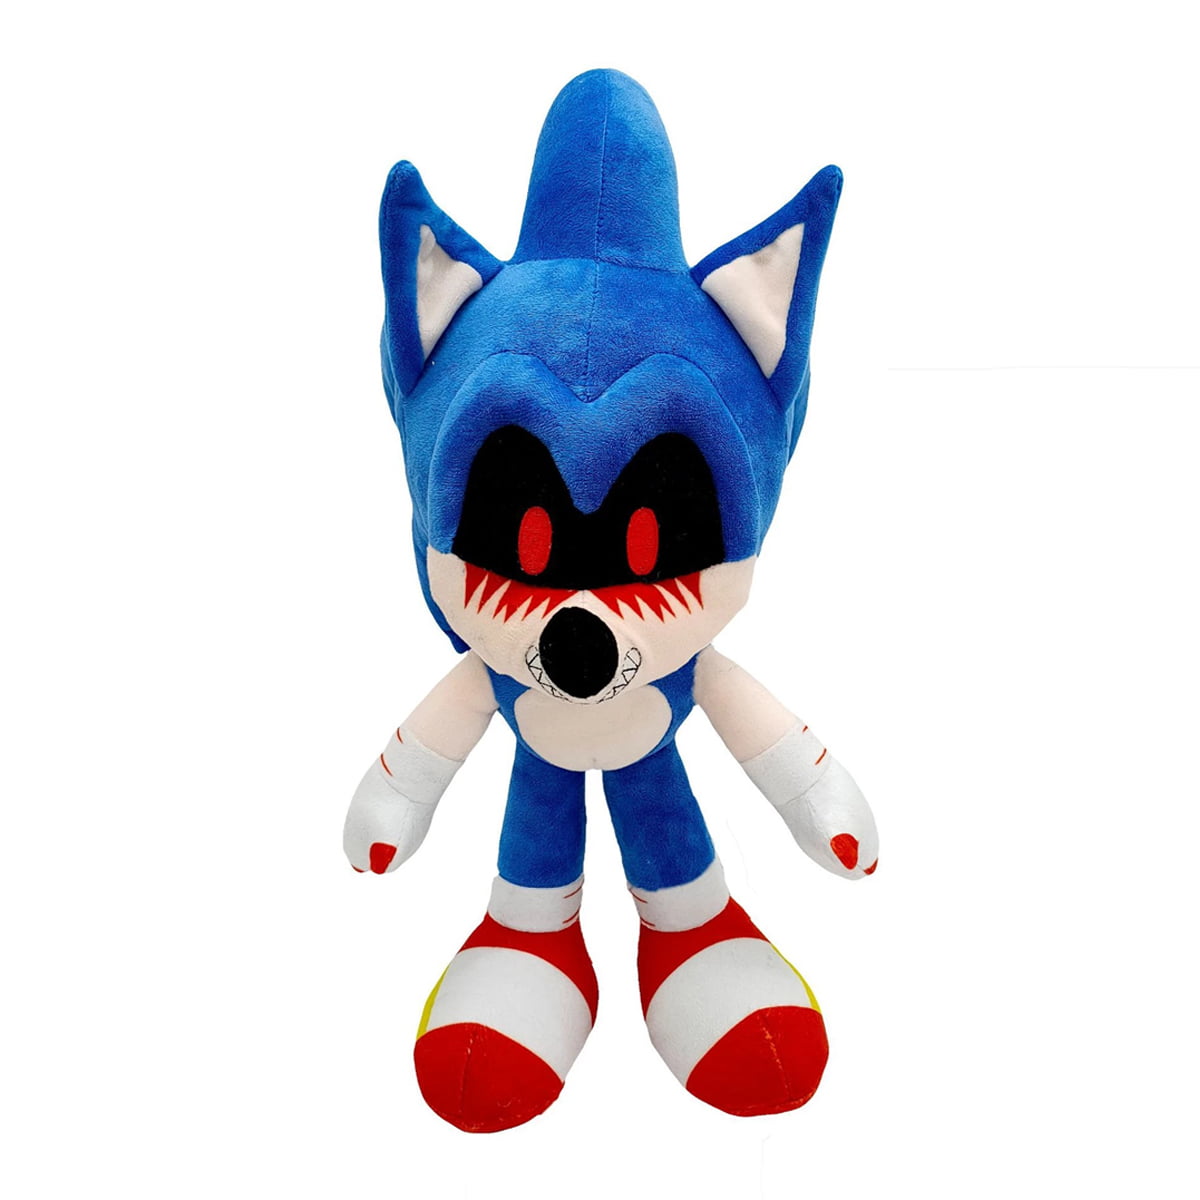 Sega SONIC THE HEDGEHOG Plush Soft Toy 30 cm 11.81 inches Official New 